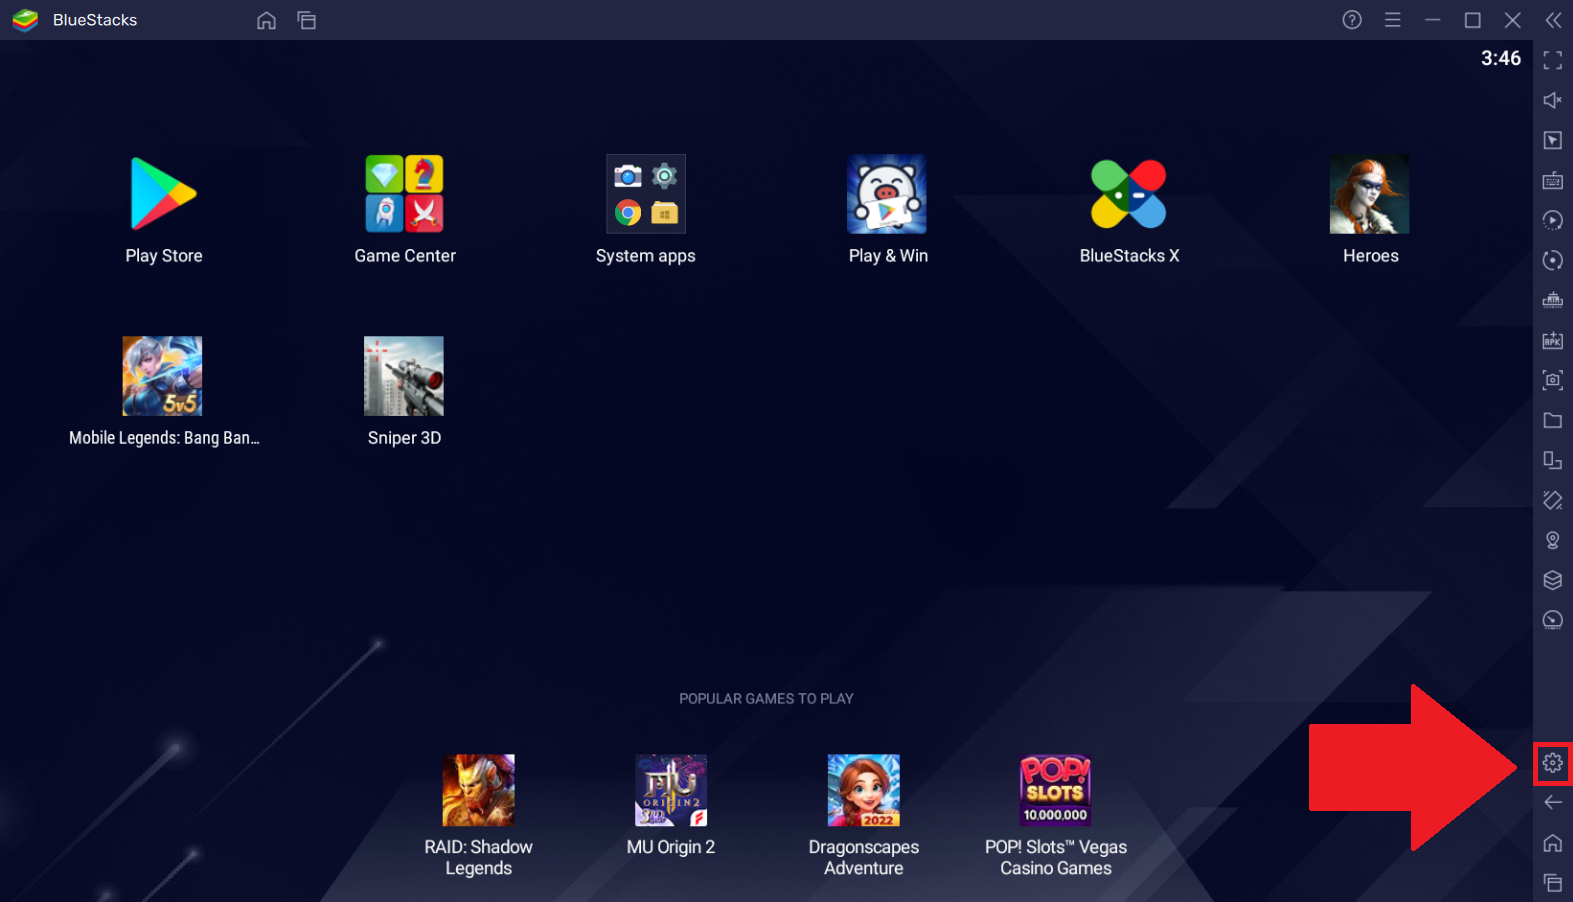 Native Mouse Support for Roblox Games on BlueStacks 5 